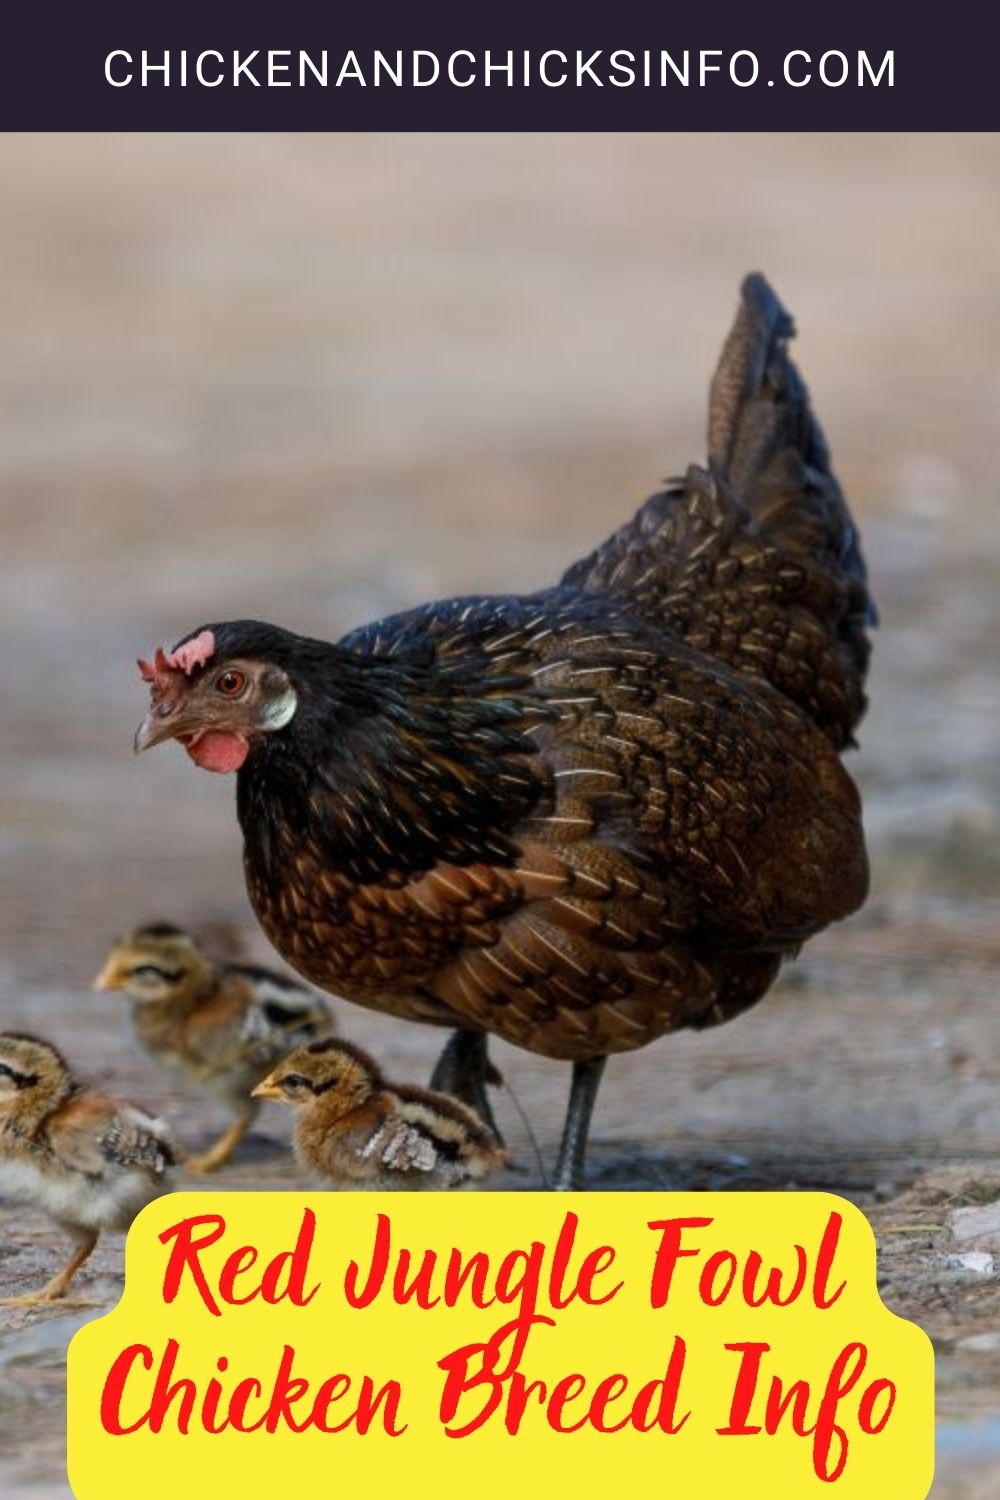 Red Jungle Fowl Chicken Breed Info pinterest image.